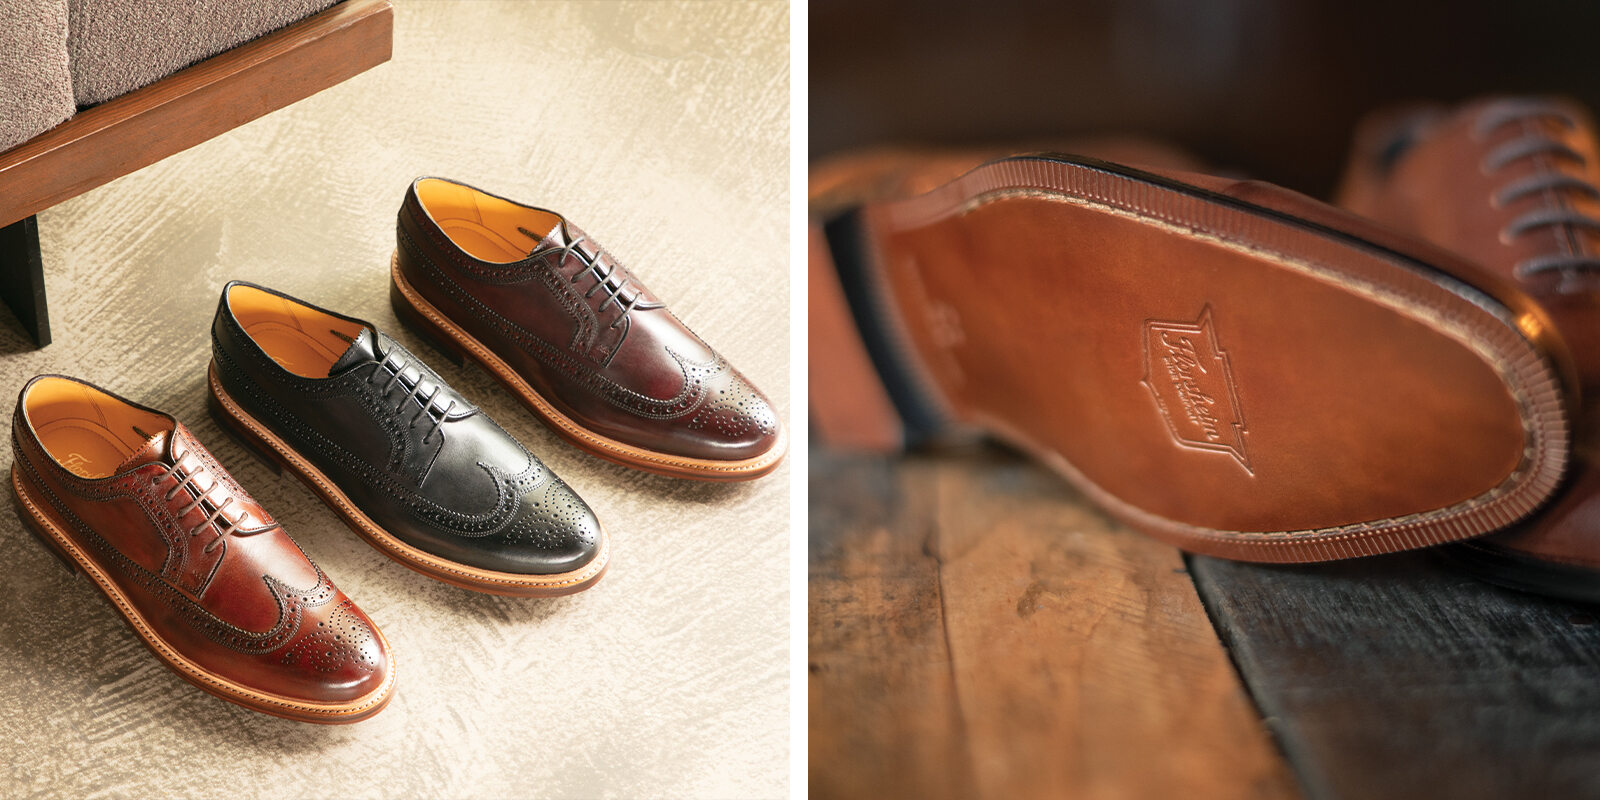 goodyear welt casual shoes